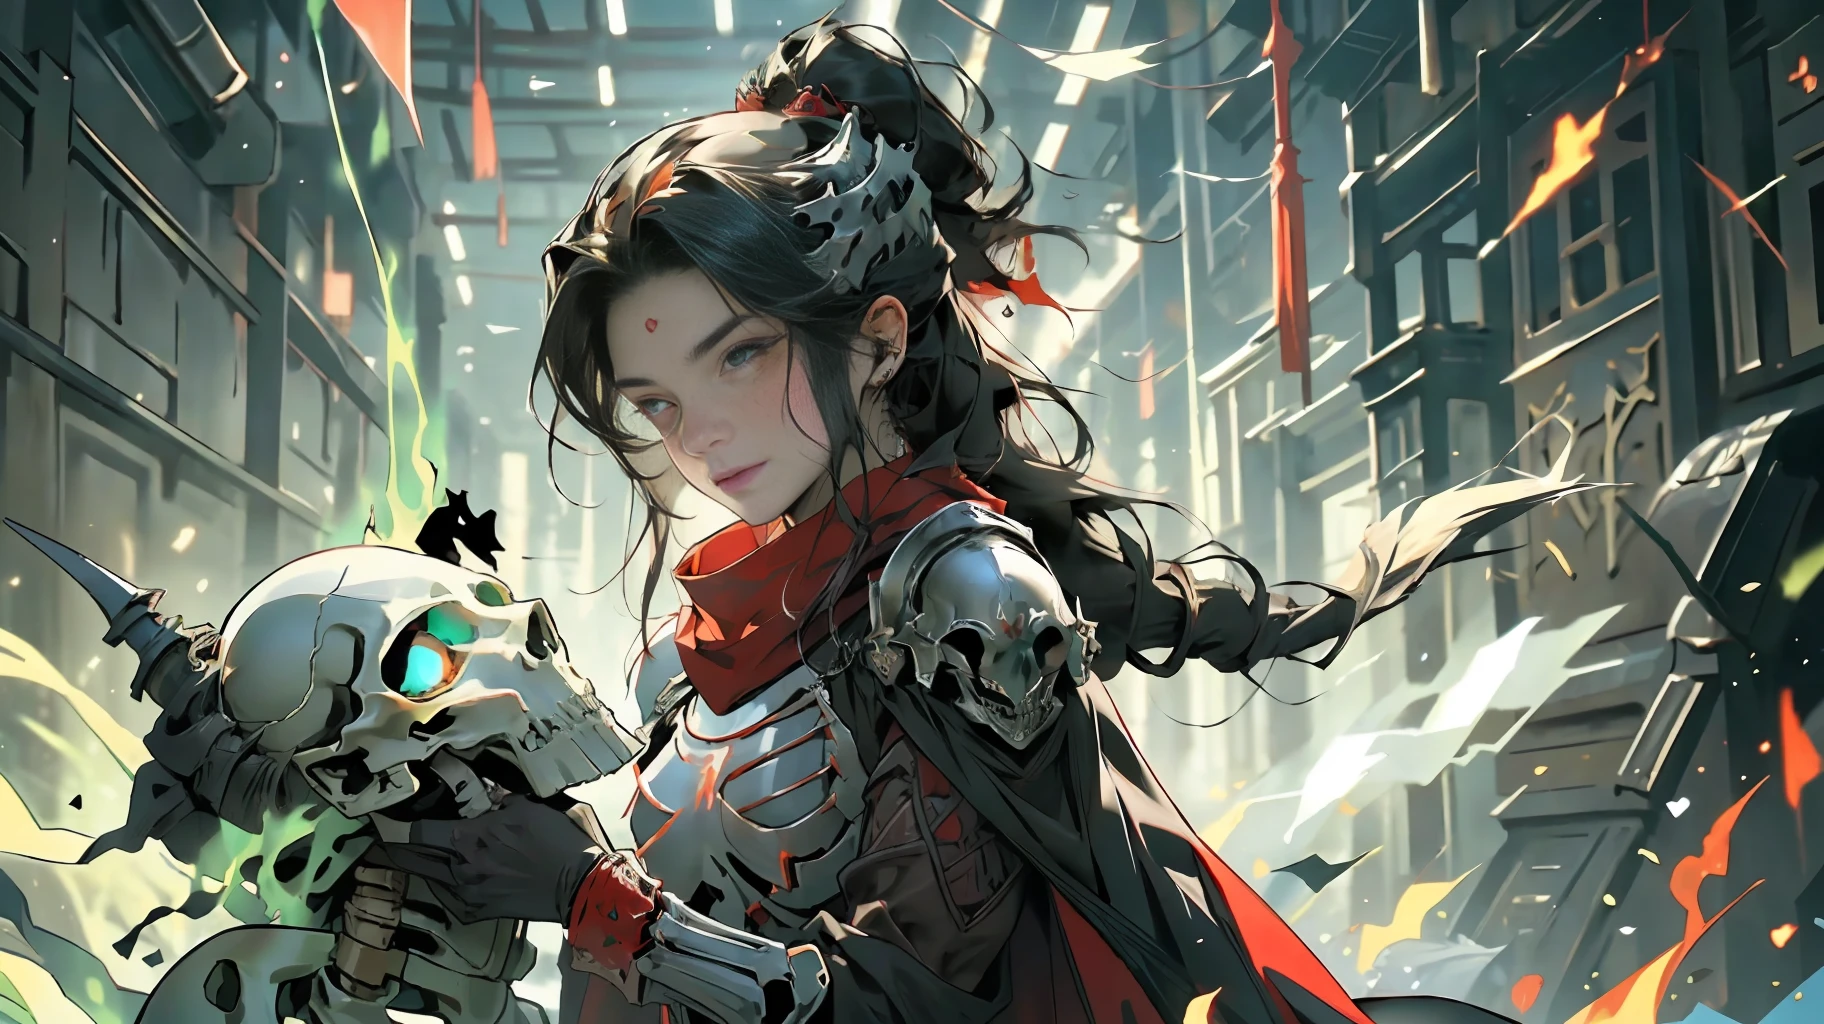 (Green + Red Flame: 1.5 + Complex Skeleton Armor: 0.8 + Armor: Wolf Skull Decoration on the Shoulder + Red Scarf Swaying in the Wind), (A Charming Girl + Delicate Facial Features + Red Glowing Eyes + Sit Down), Background Hell Scene, Both sides are full of skeleton undead soldiers, undispersed souls are flying all over the sky, 8K, high detail, face is not blurred, normal human fingers, full body, far view, face is not white ossified